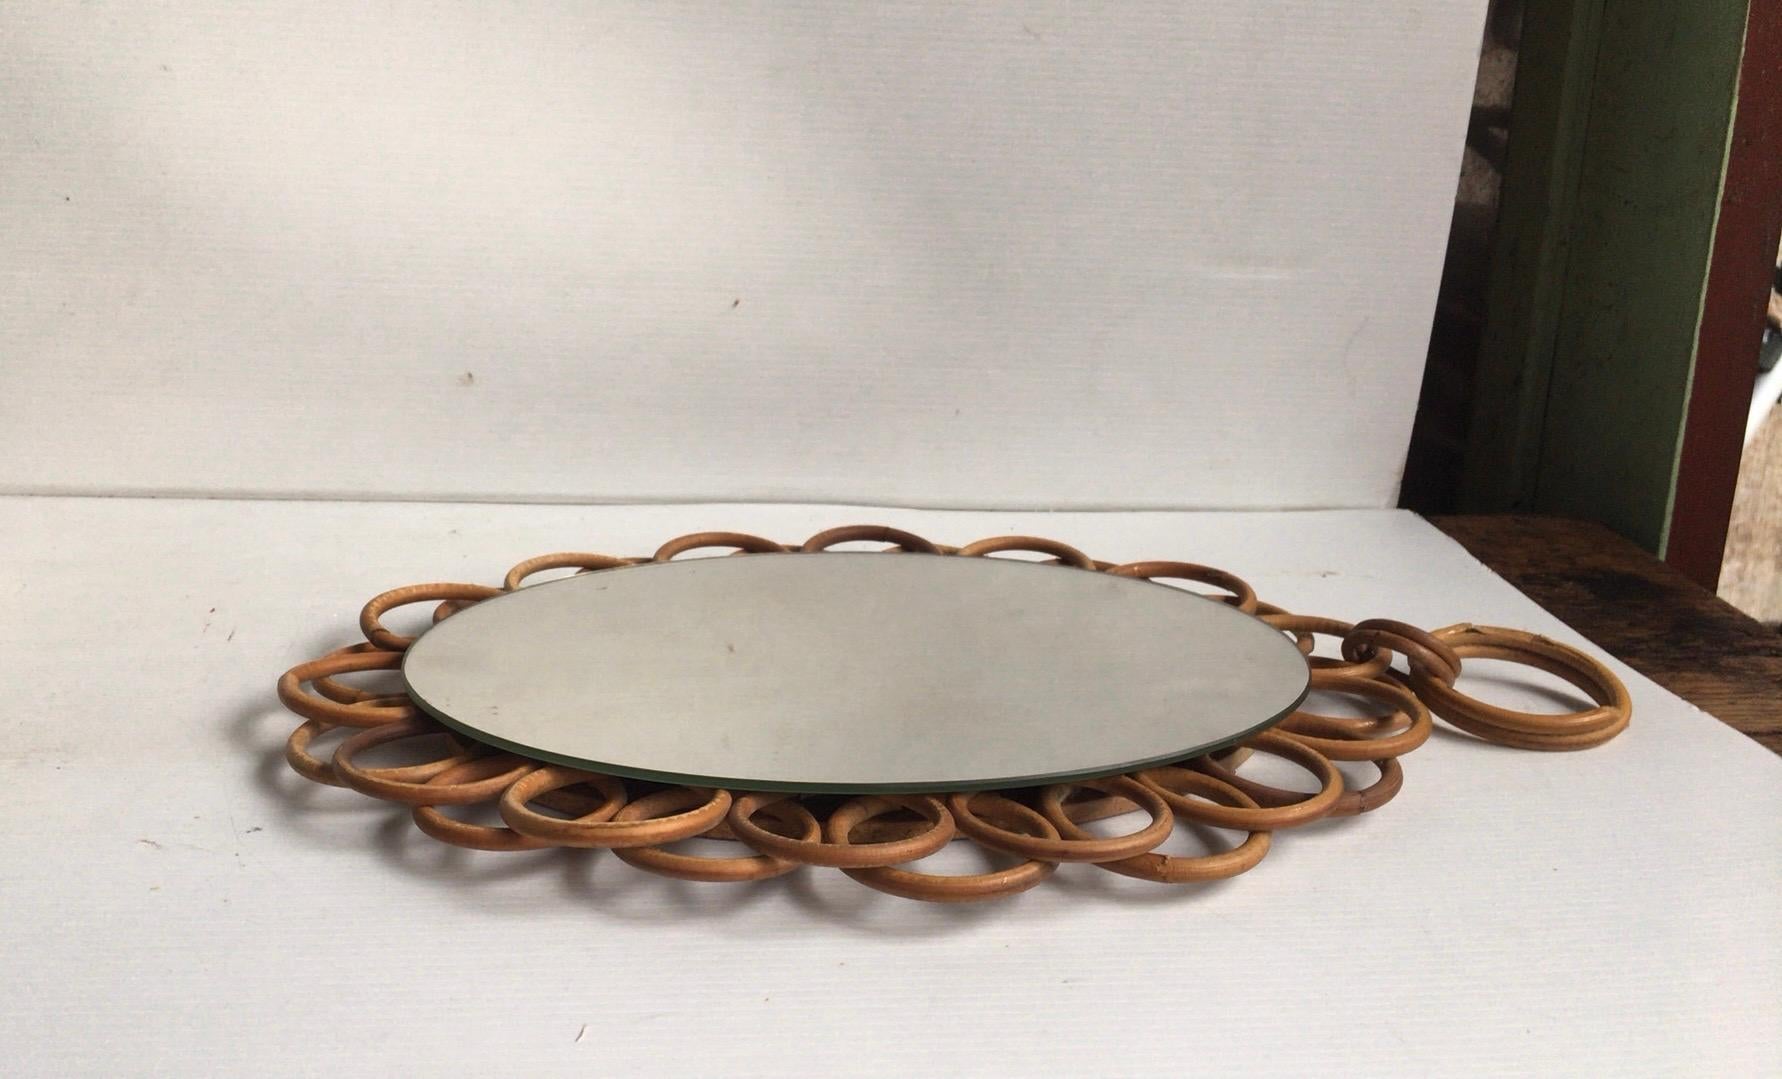 Small French rattan oval mirror hanging with his rattan chain.
Measures: Height 16.5 inches with the top, length 10.5 inches.
Mirror / 10.8